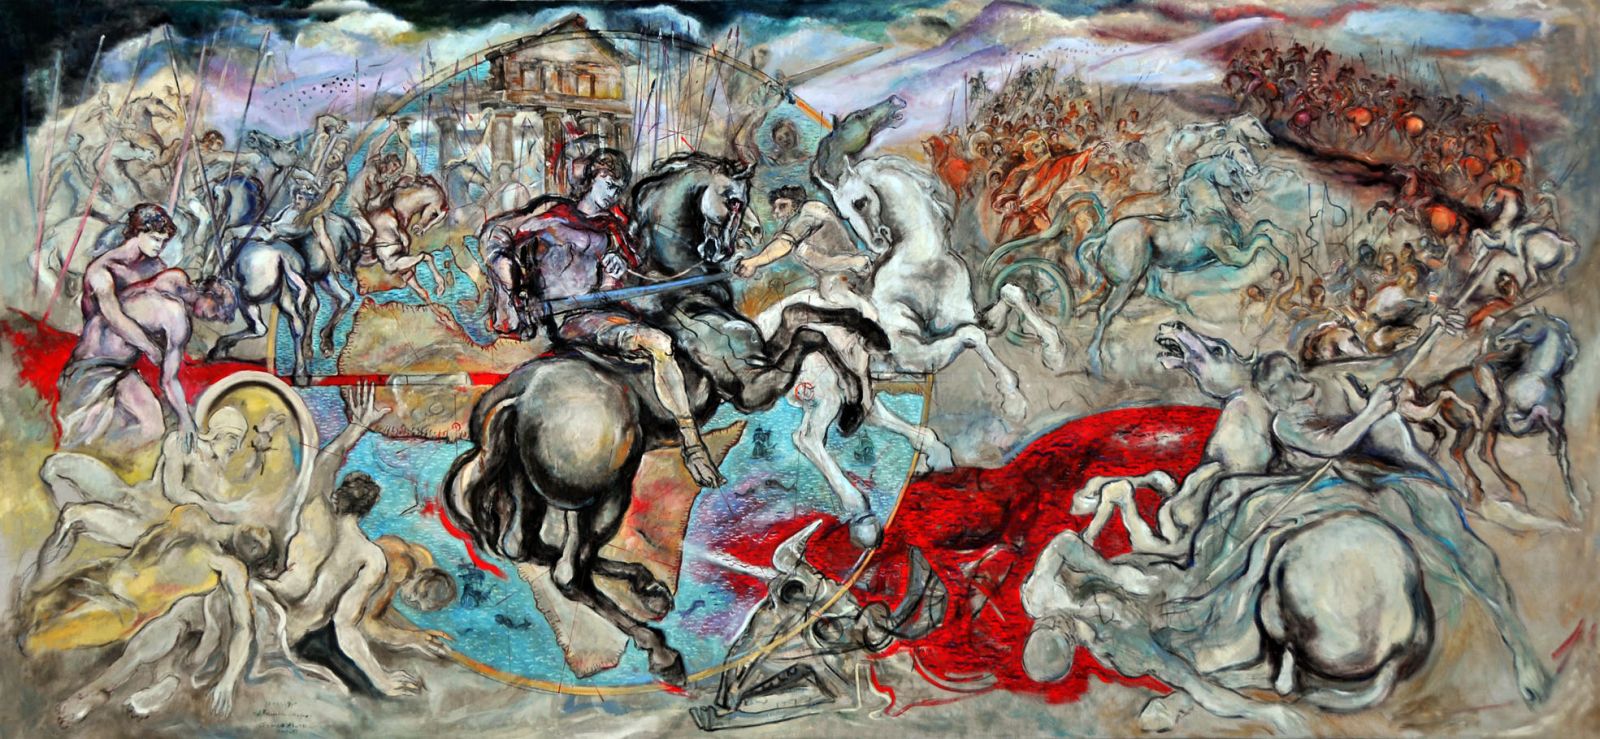 Franco Murer, ‘Alessandro Magno’, 2018-19, oil painting on canvas, 360x170cm